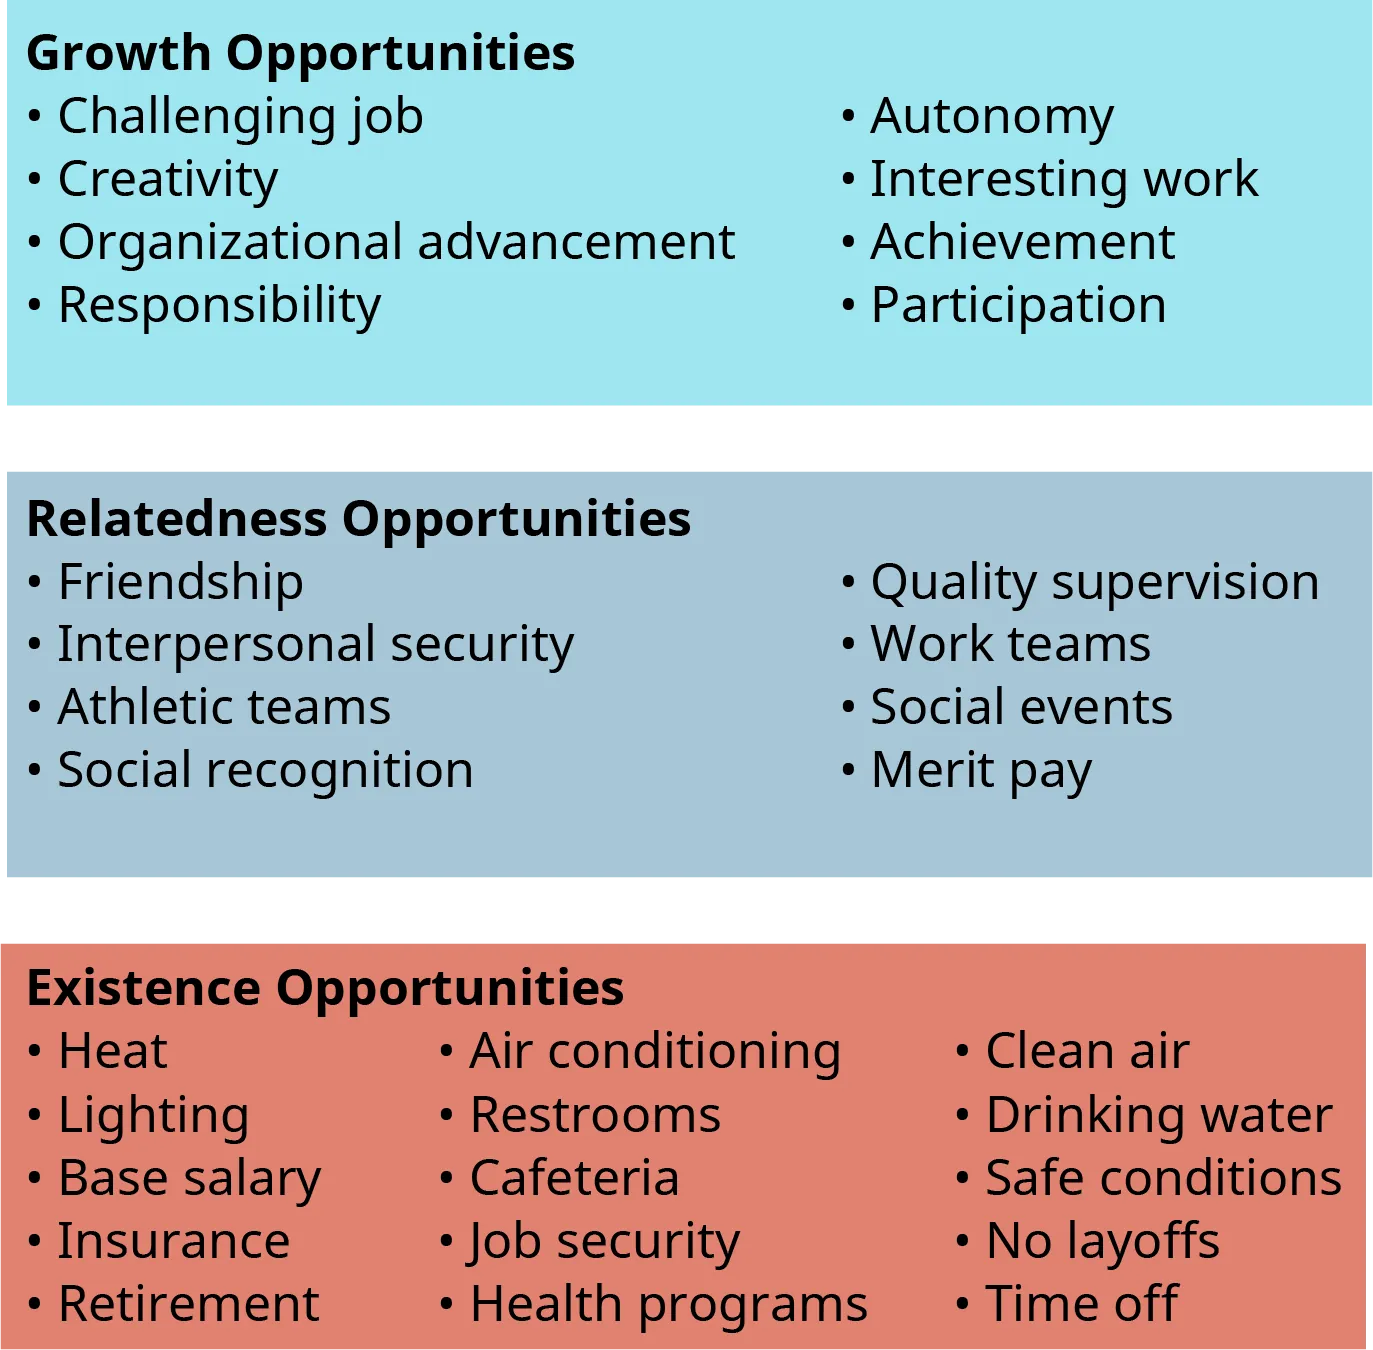 An illustration shows the various ways in which organizations can help their members satisfy three needs. From bottom upward, the needs are Existence needs, Relatedness needs, and Growth needs.